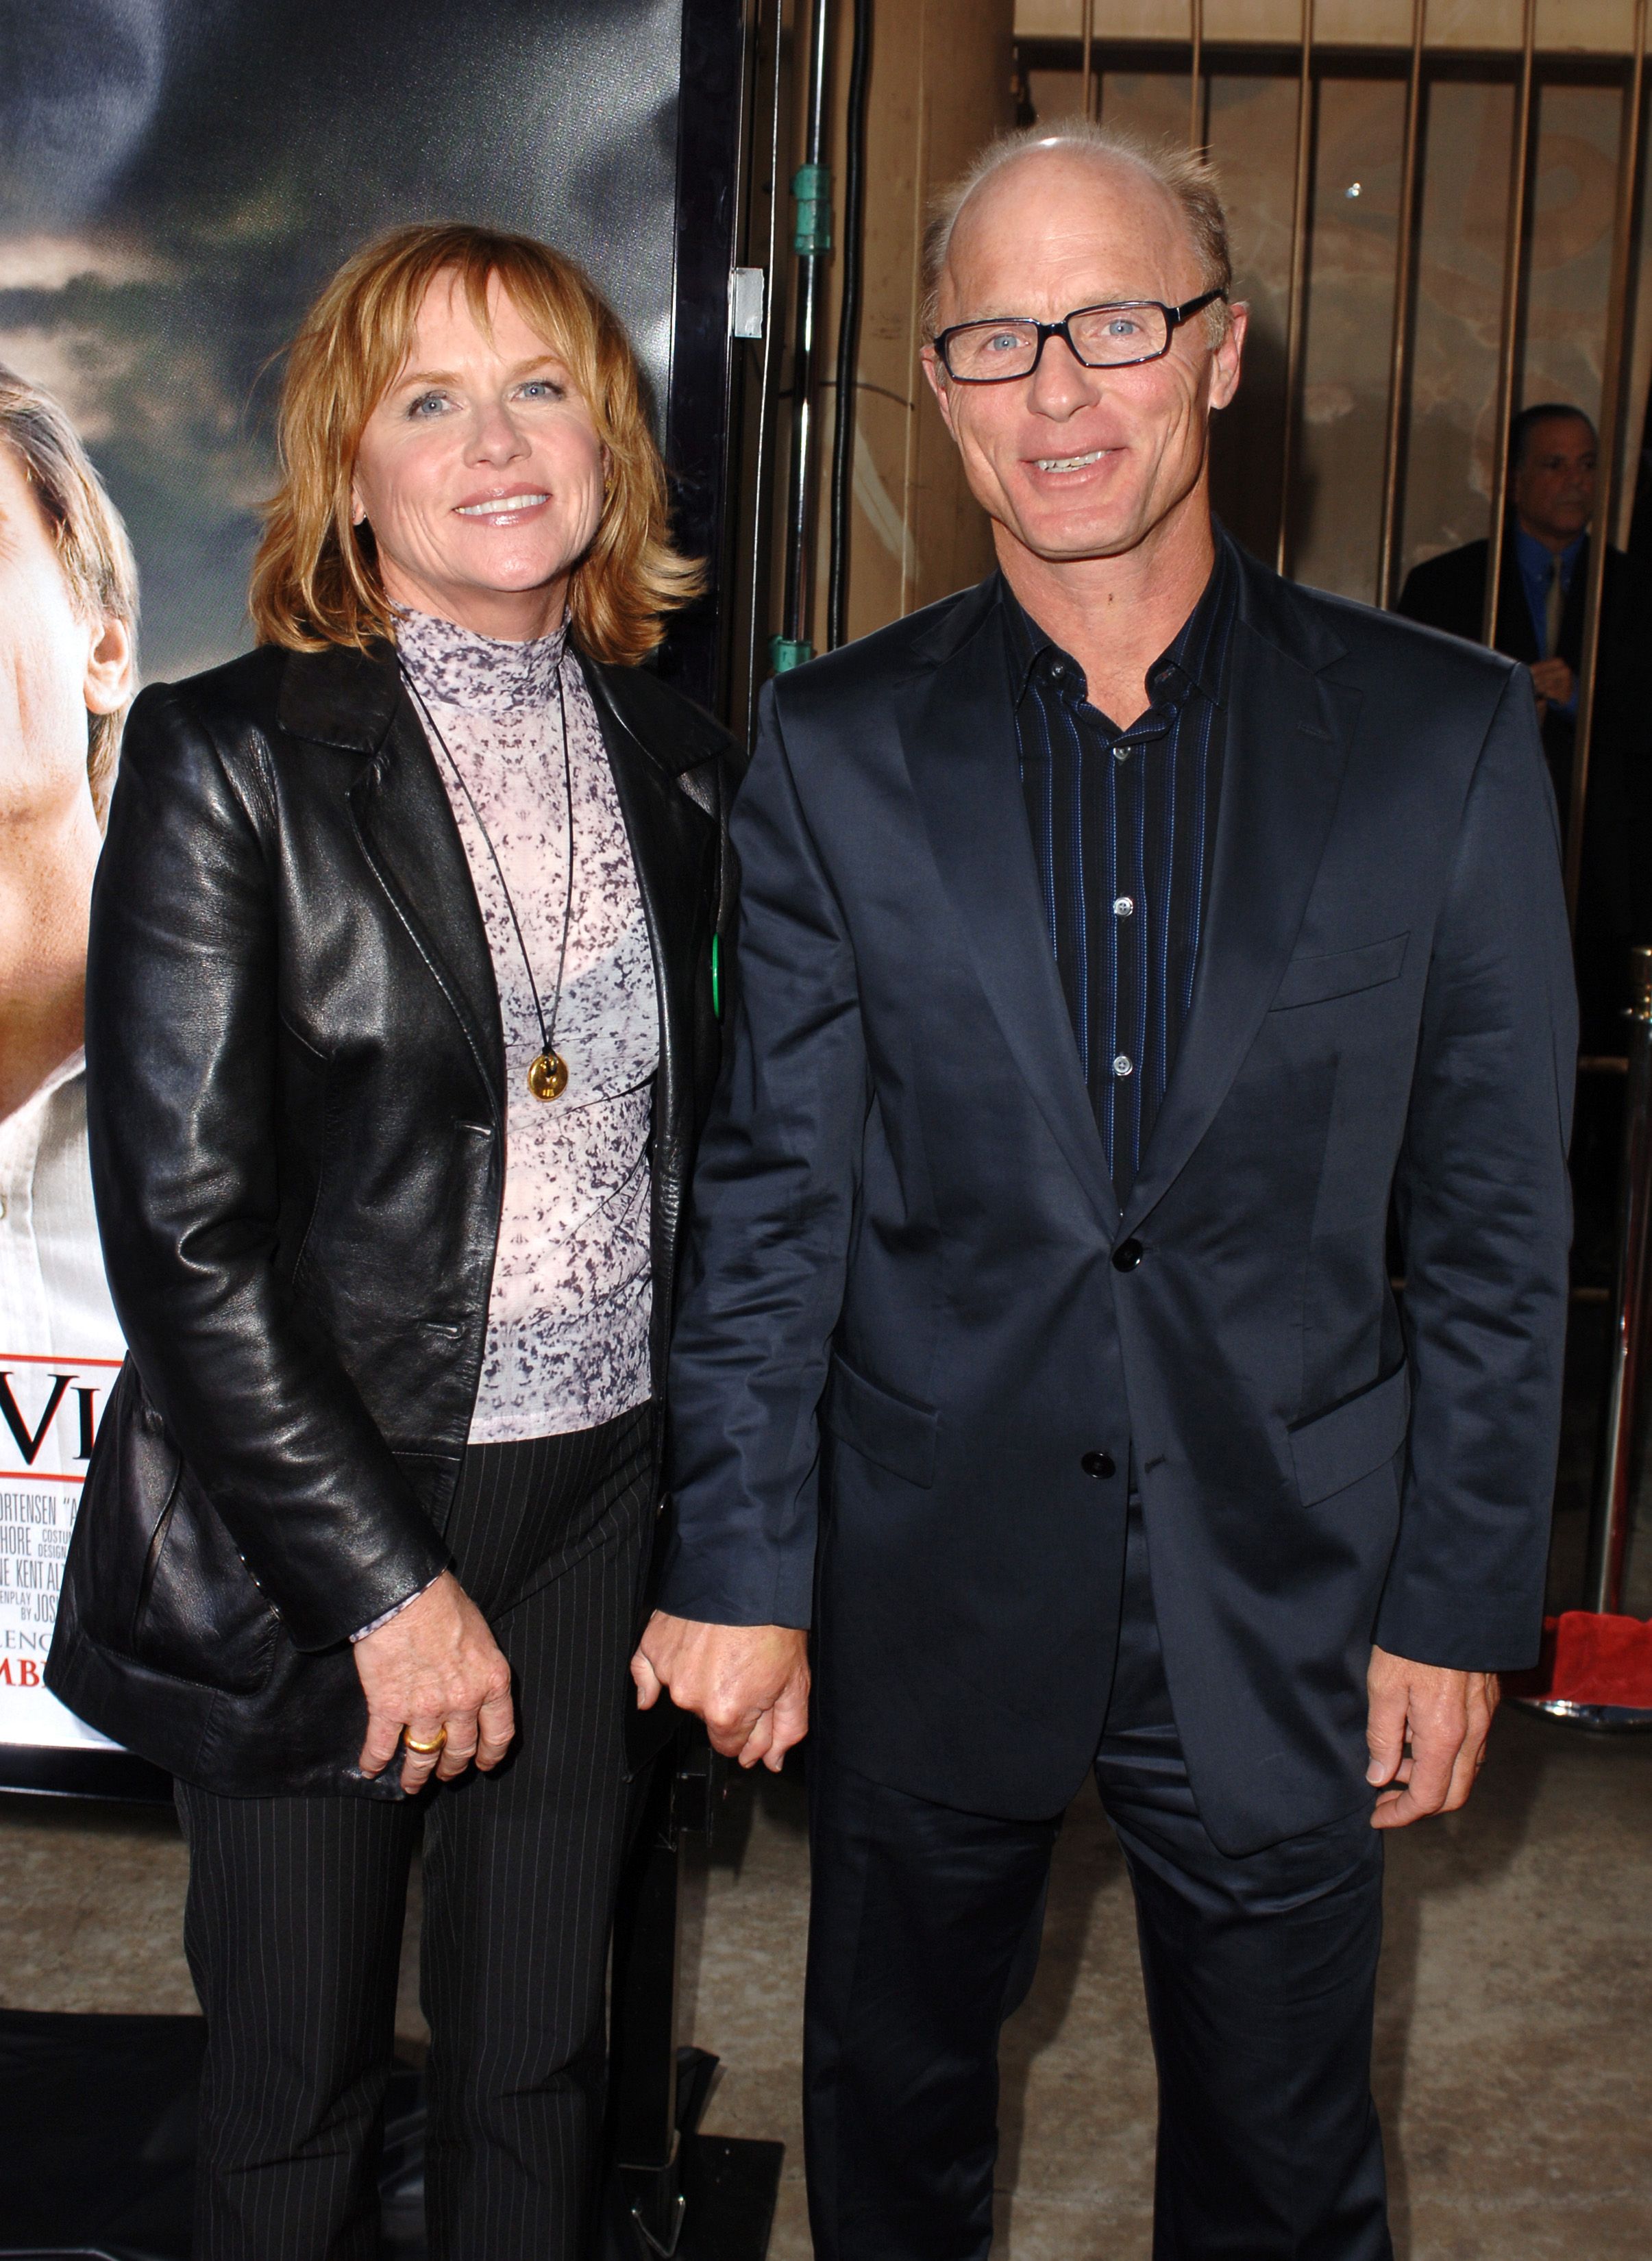 Amy Madigan and Ed Harris arive at "A History of Violence" Los Angeles Premiere at Egyptian Theatre in Los Angeles, California, United States. | Source: Getty Images